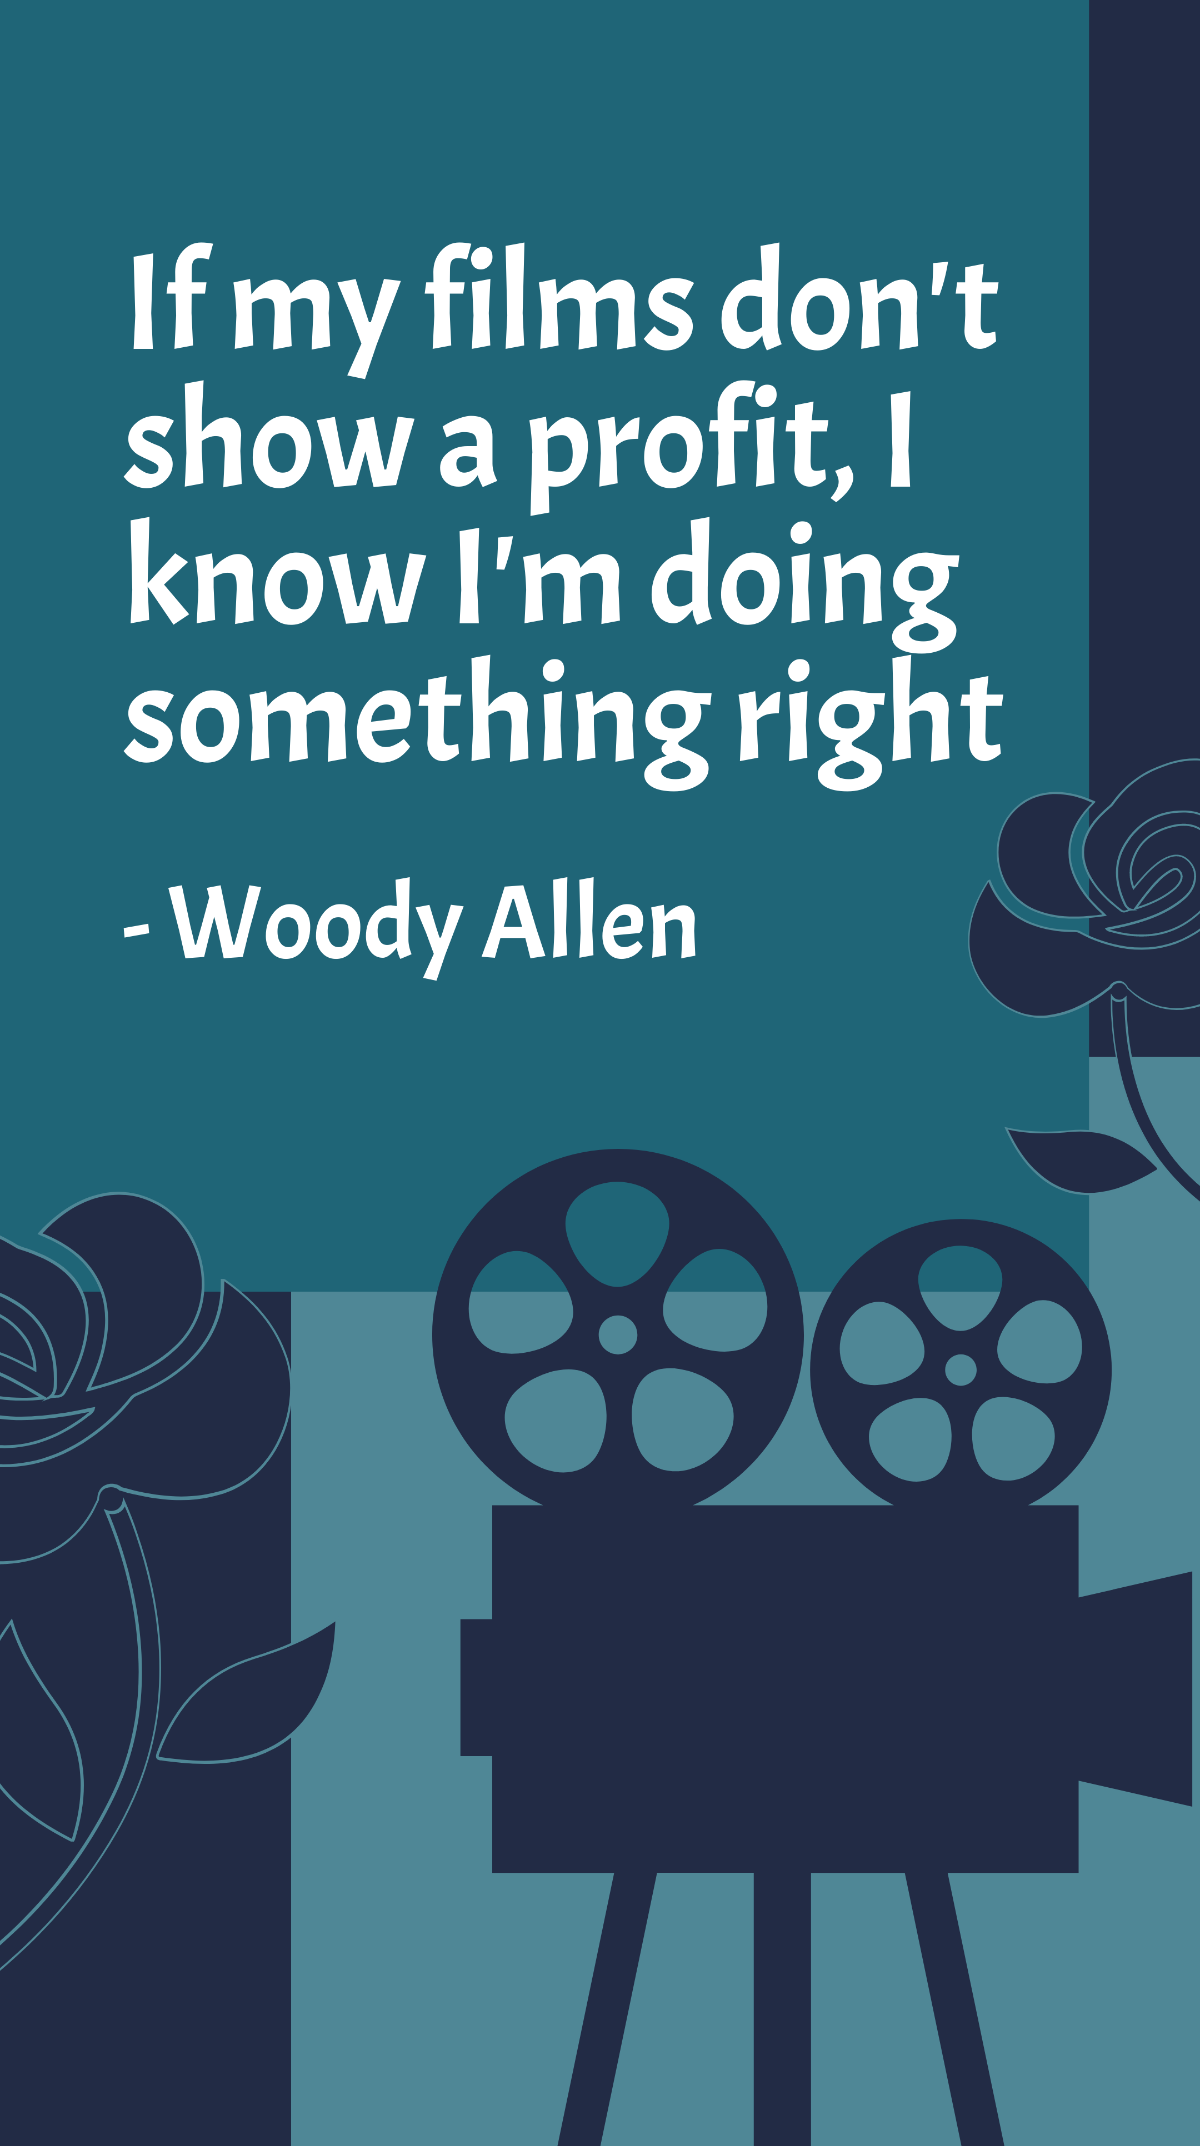 Woody Allen - If my films don't show a profit, I know I'm doing something right Template